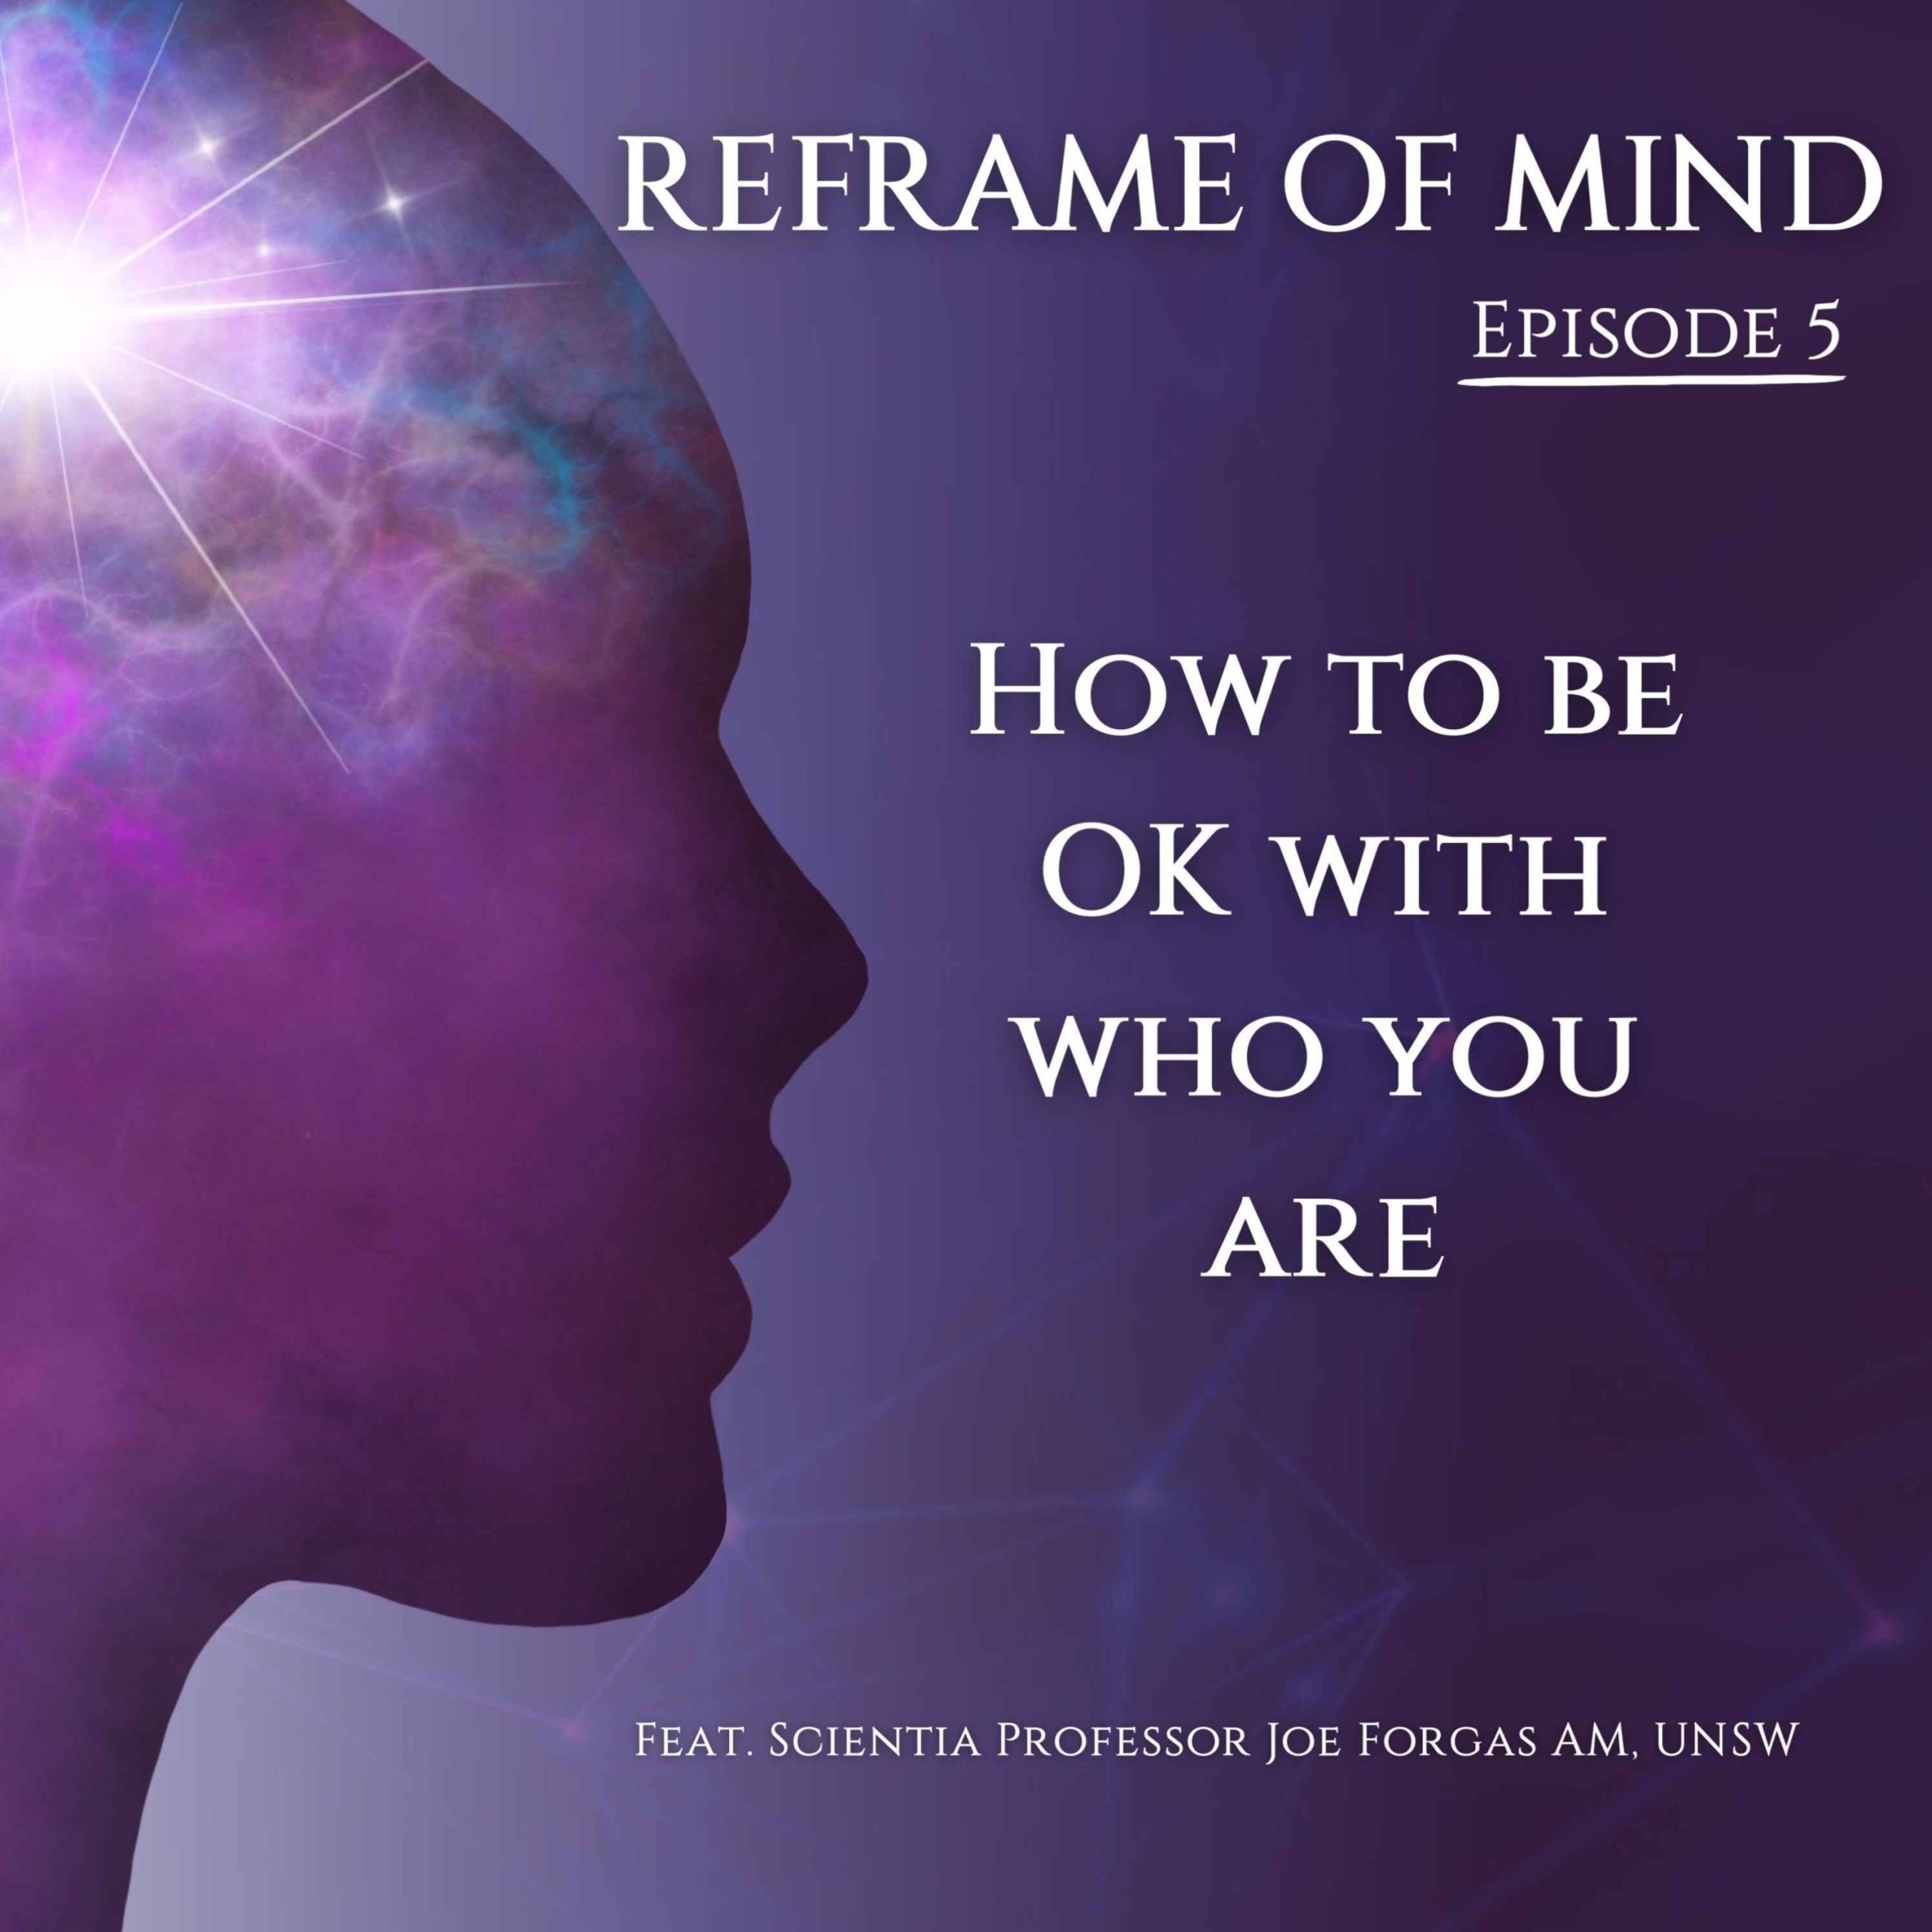 How to be OK with who you are, feat. Scientia Professor Joe Forgas AM